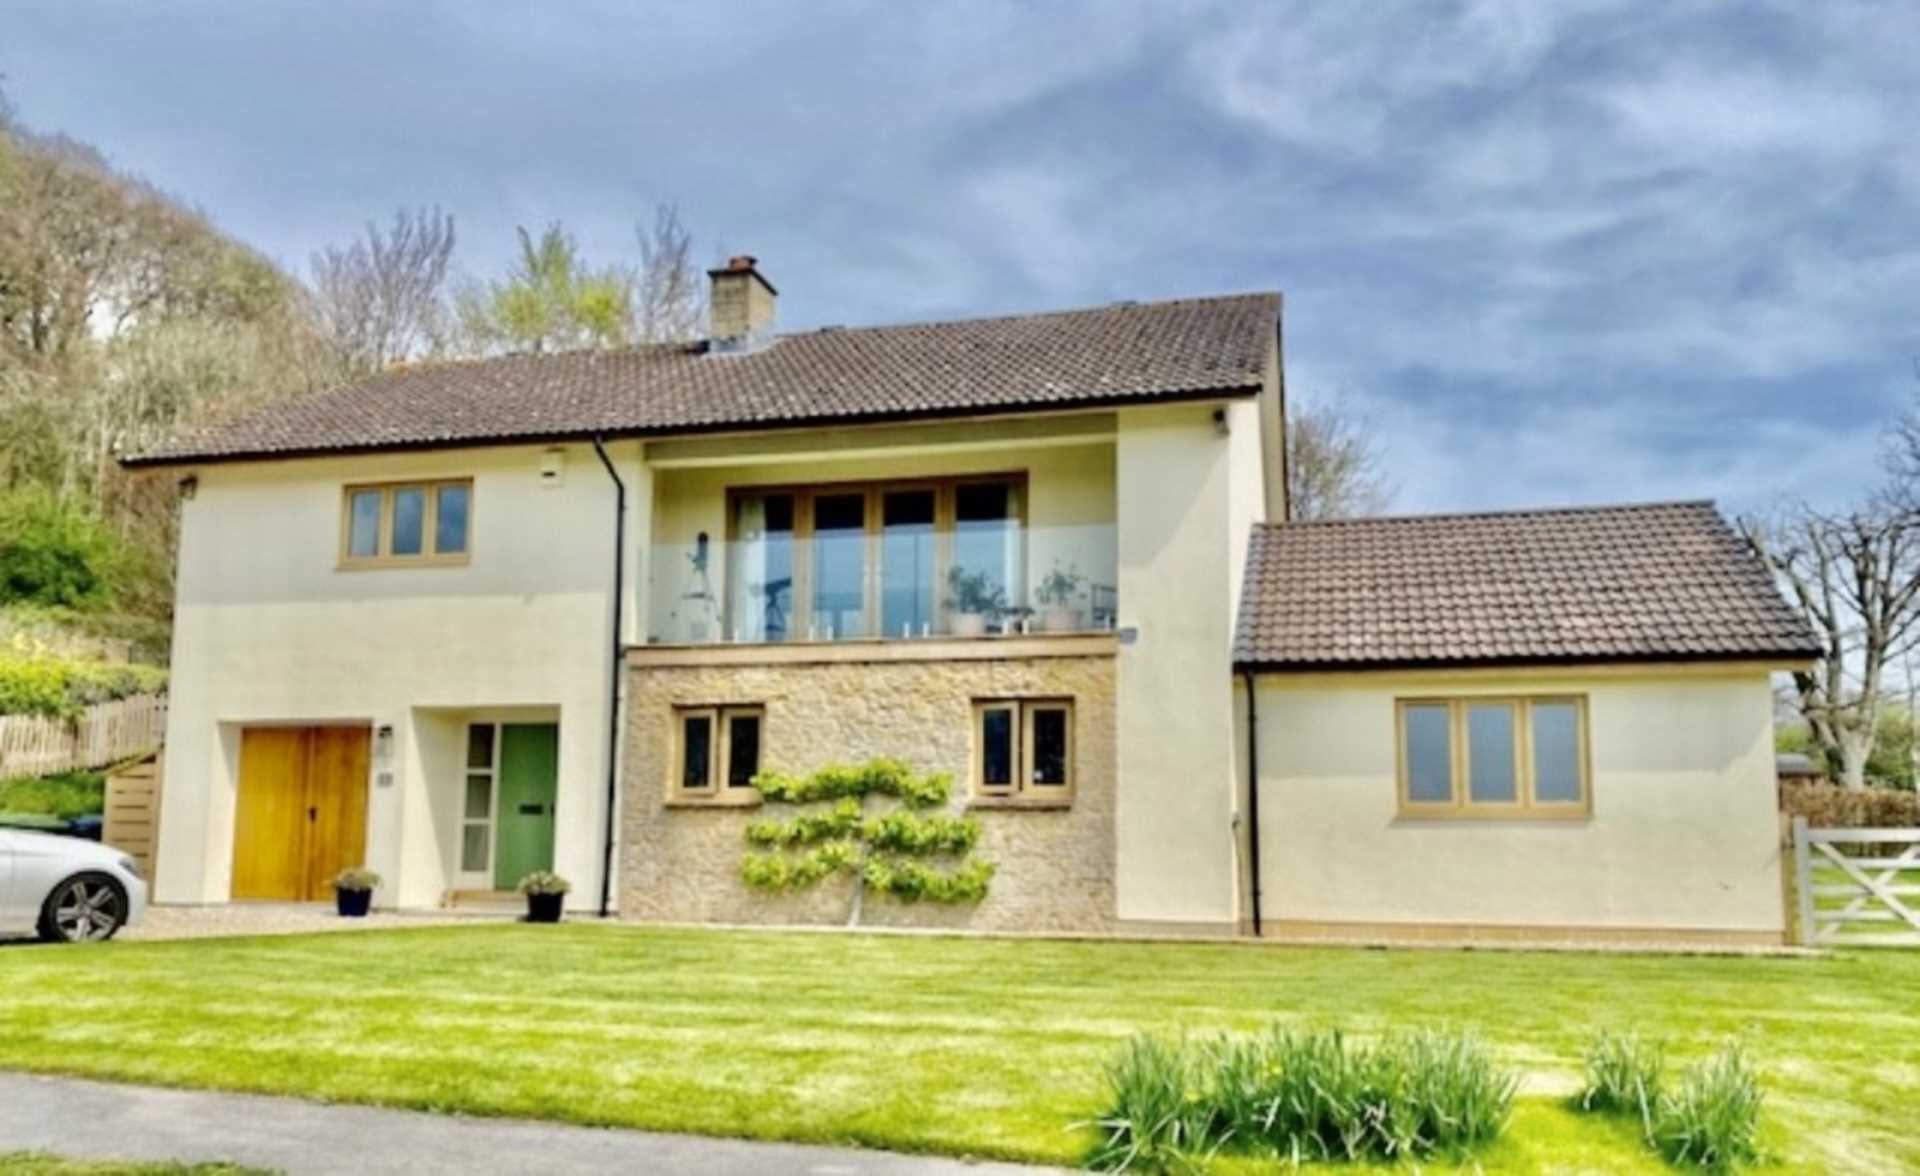 Swallows Property Letting - 5 Bedroom Detached, The Downlands, Warminster